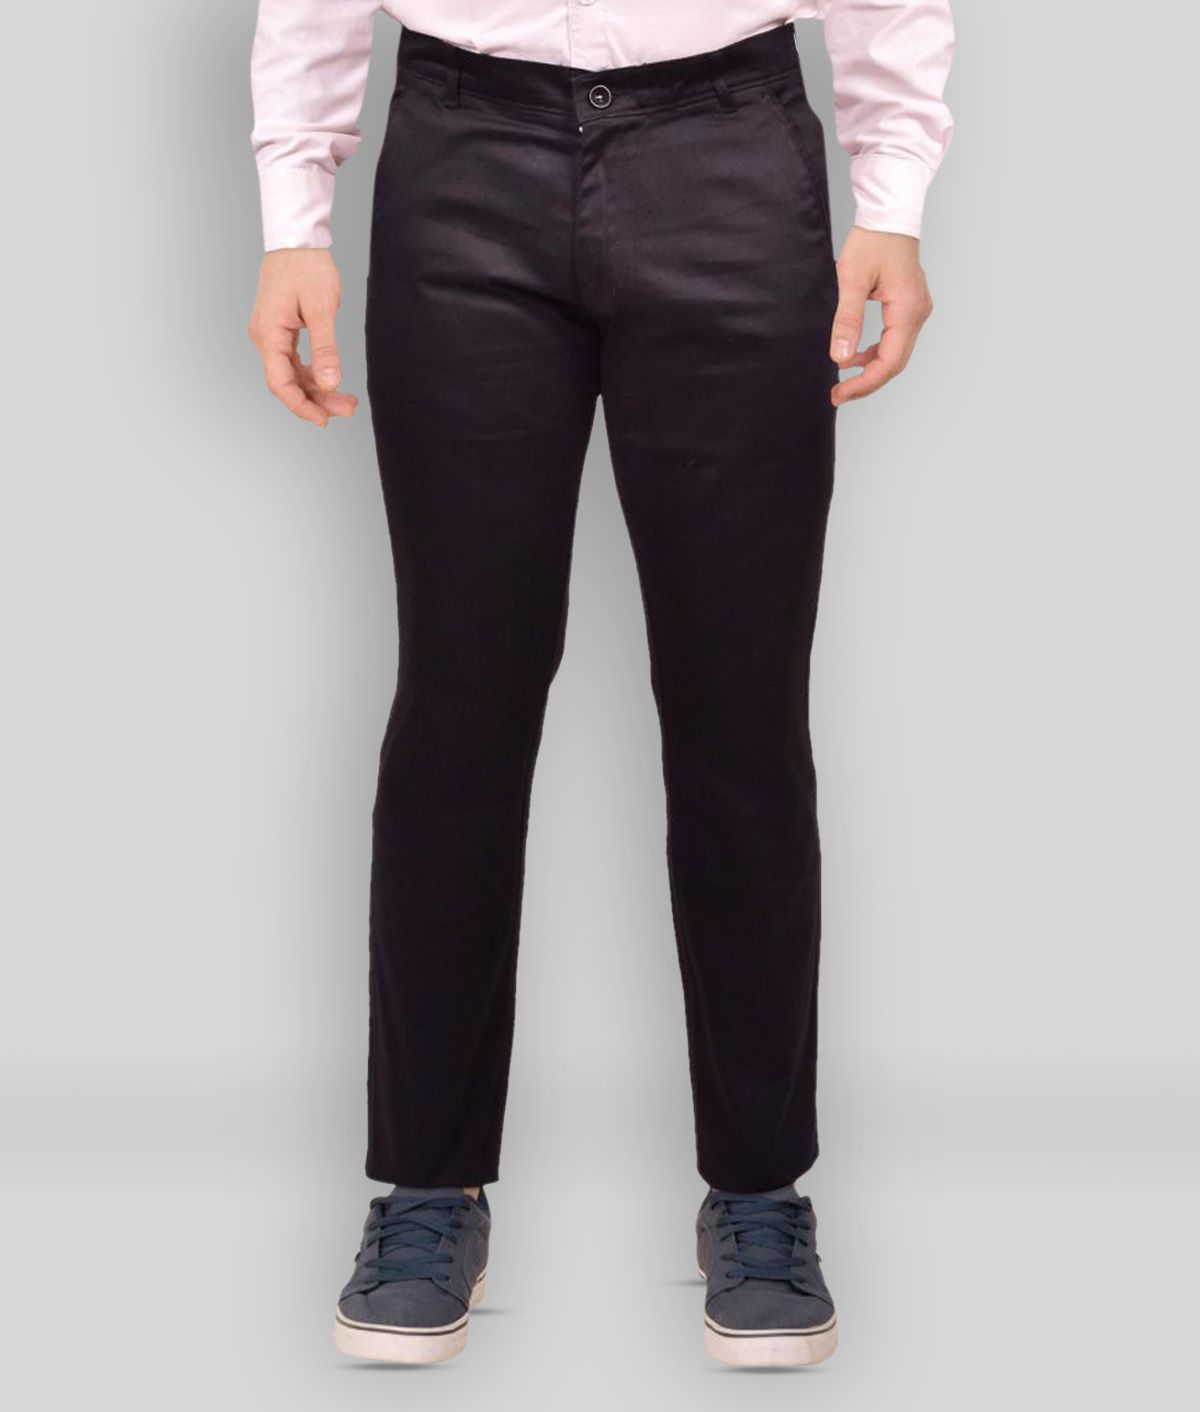     			Just Trousers - Black Cotton Blend Slim Fit Men's Chinos (Pack of 1)